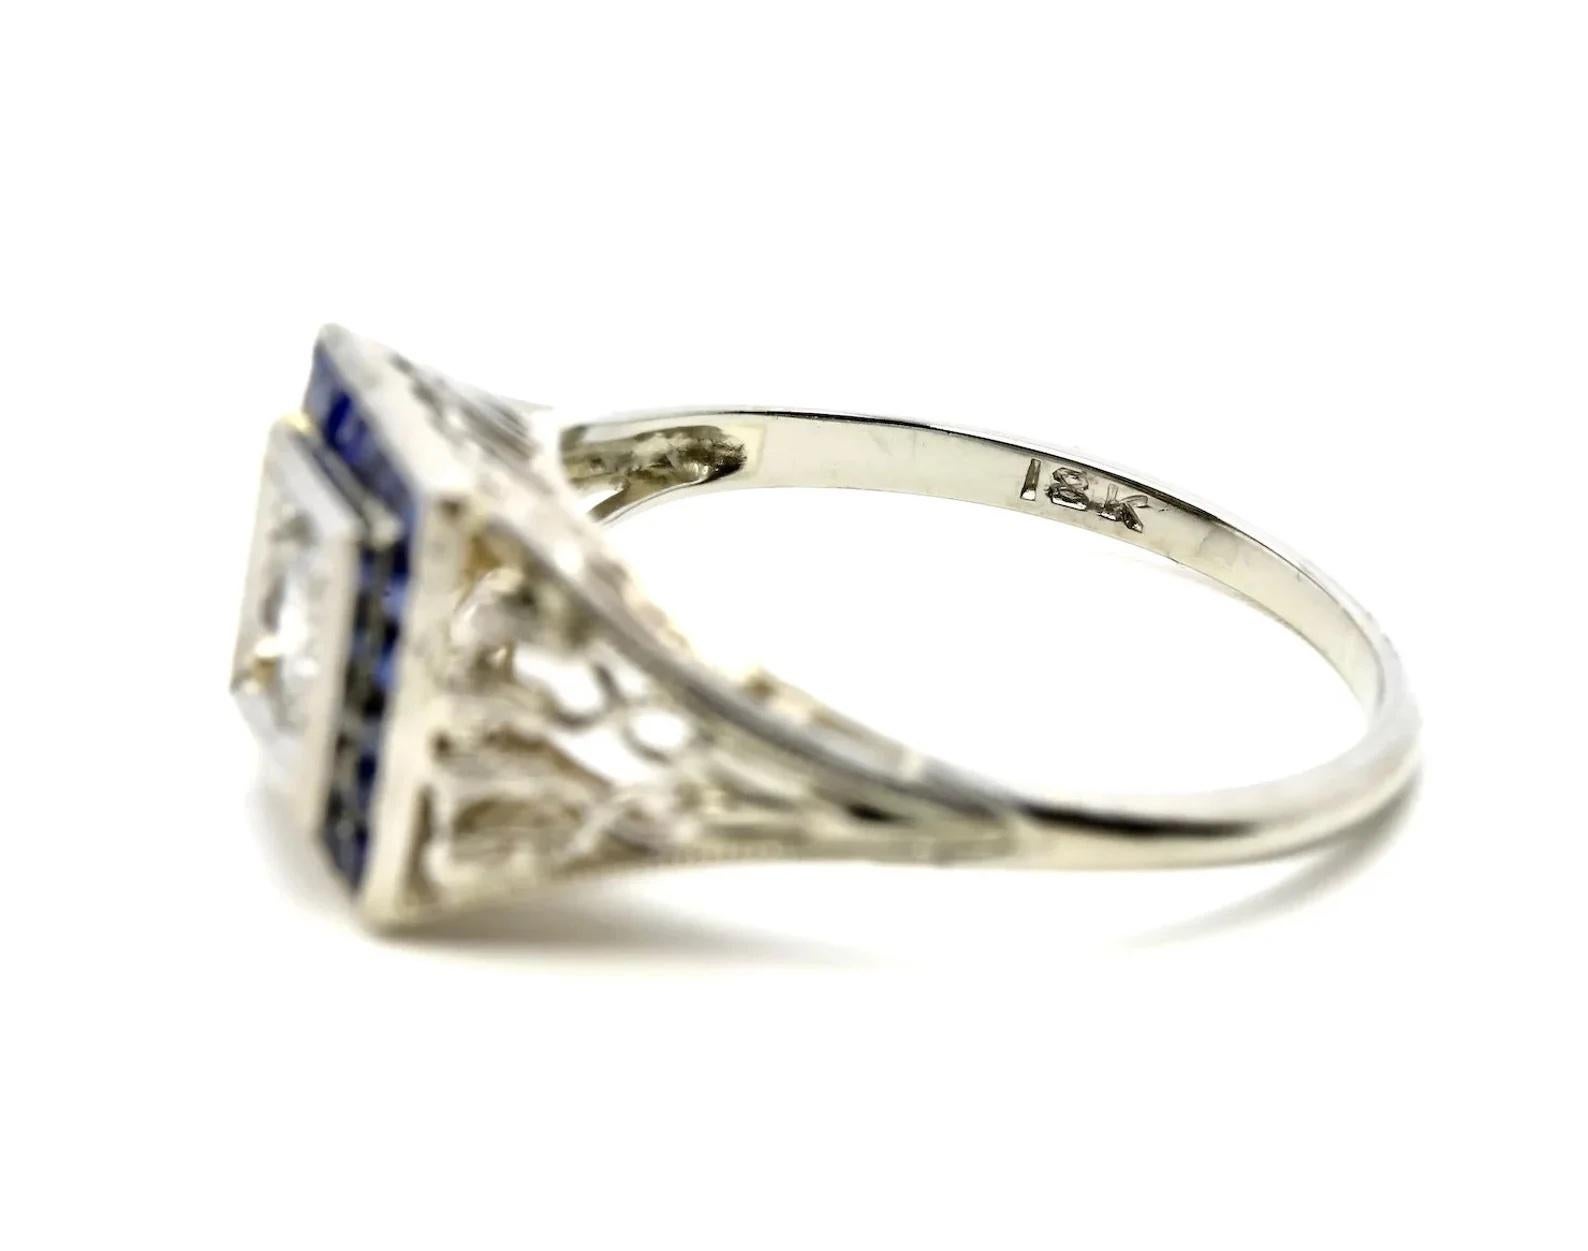 Women's Art Deco 0.60ctw Diamond & French Cut Sapphire Halo Ring in 18K White Gold For Sale